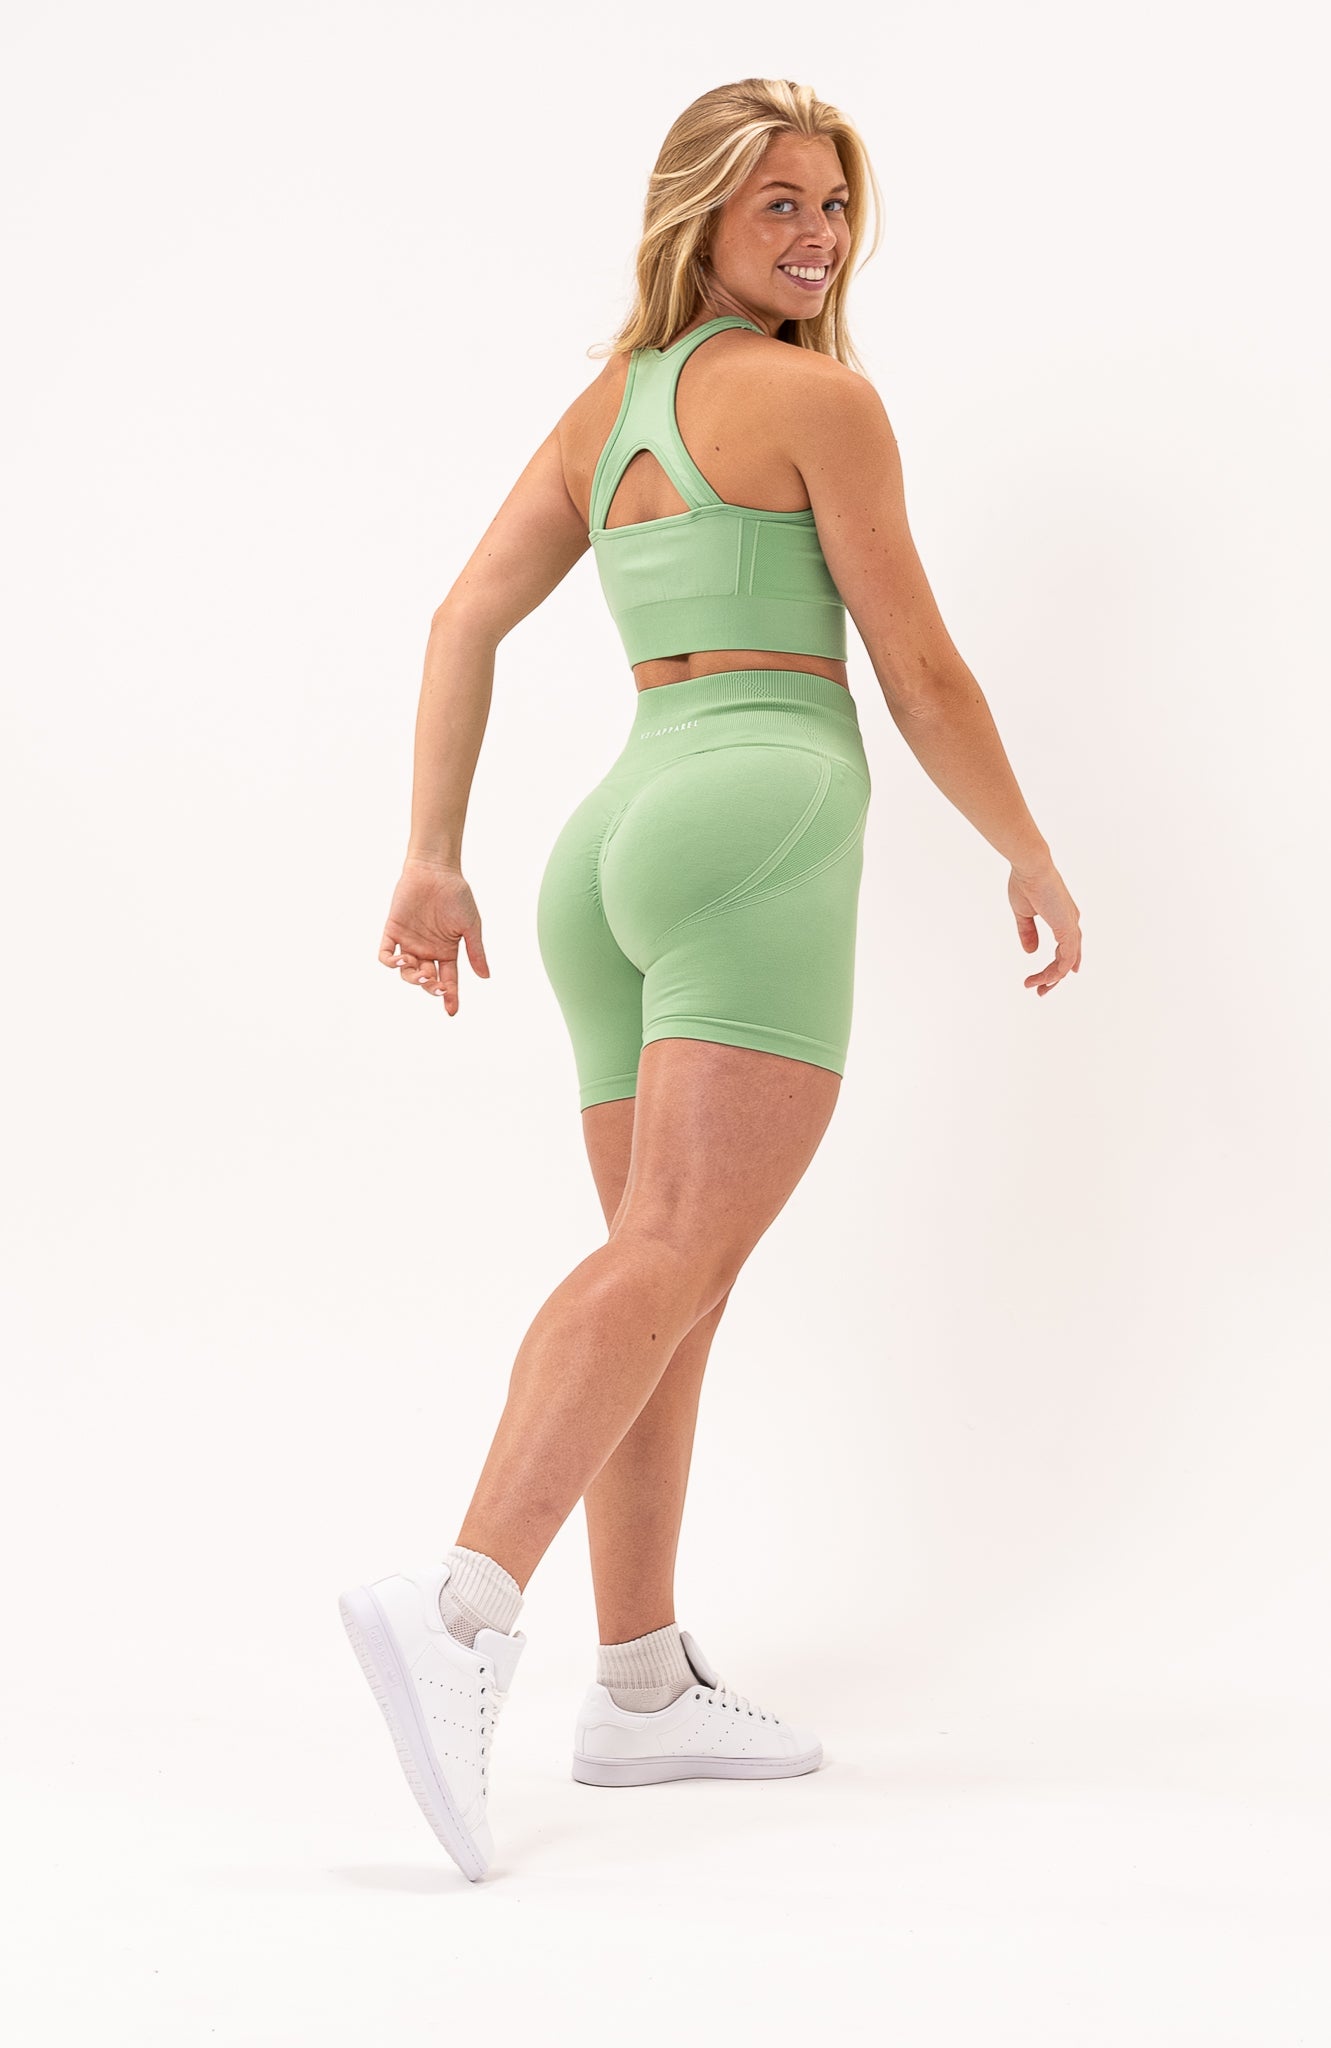 redbaysand Women's Tempo seamless scrunch bum shaping high waisted shorts and training sports bra in mint green – Squat proof 5 inch leg cycle shorts and training bra for Gym workouts training, Running, yoga, bodybuilding and bikini fitness.